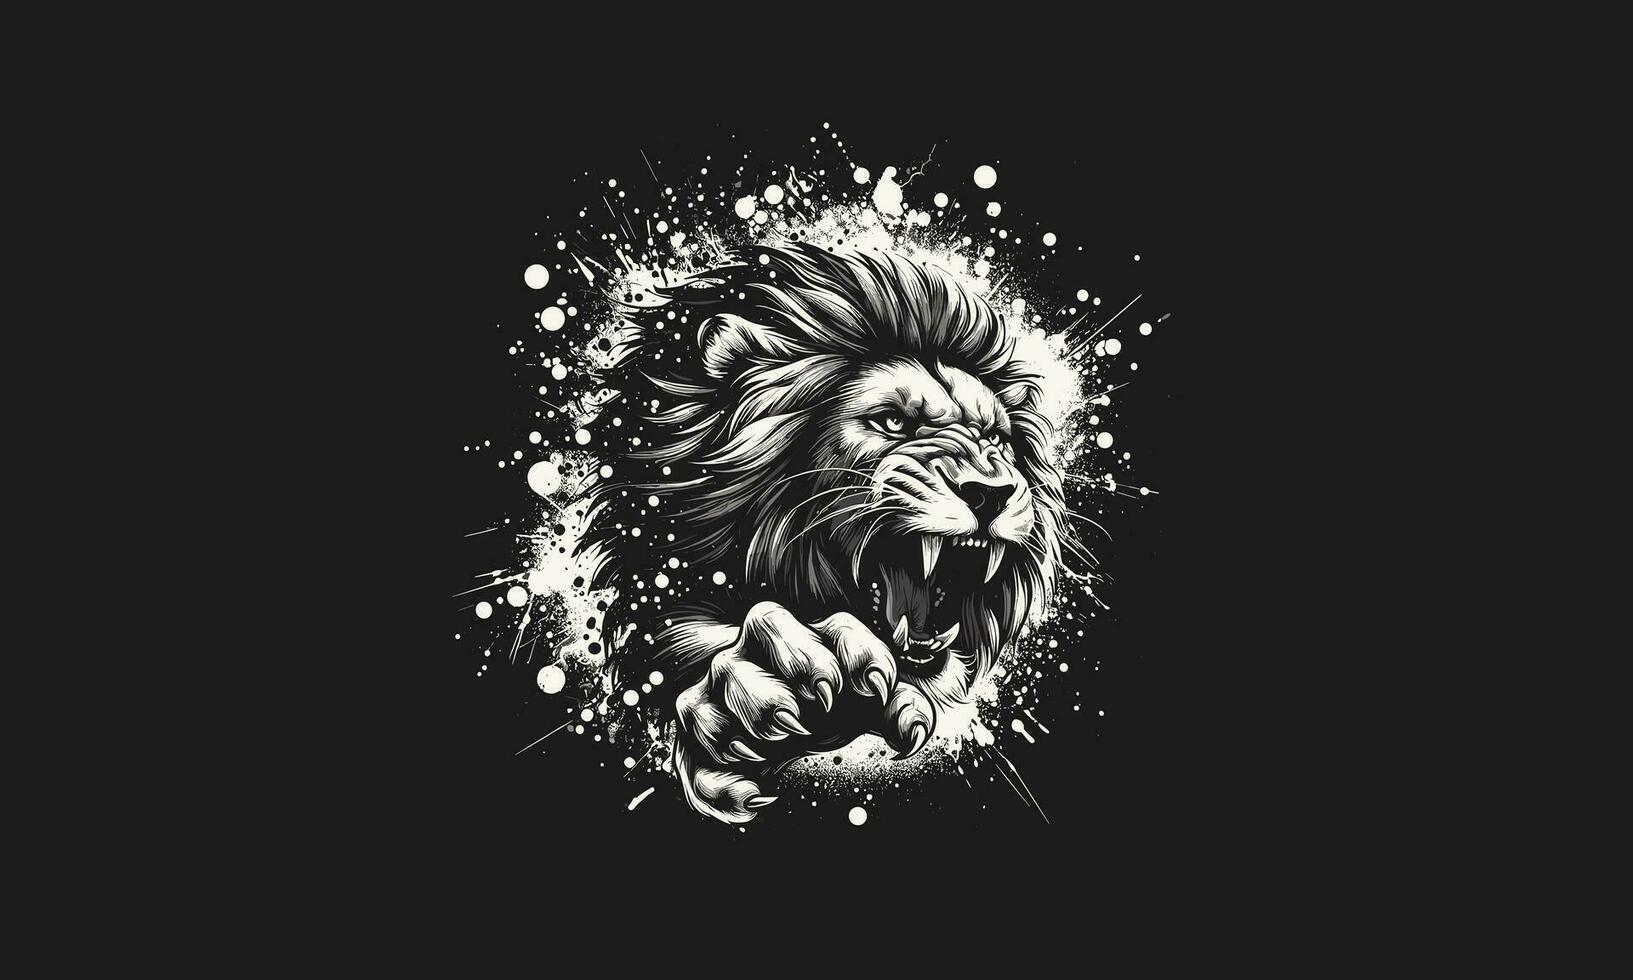 lion angry and splash background vector flat design